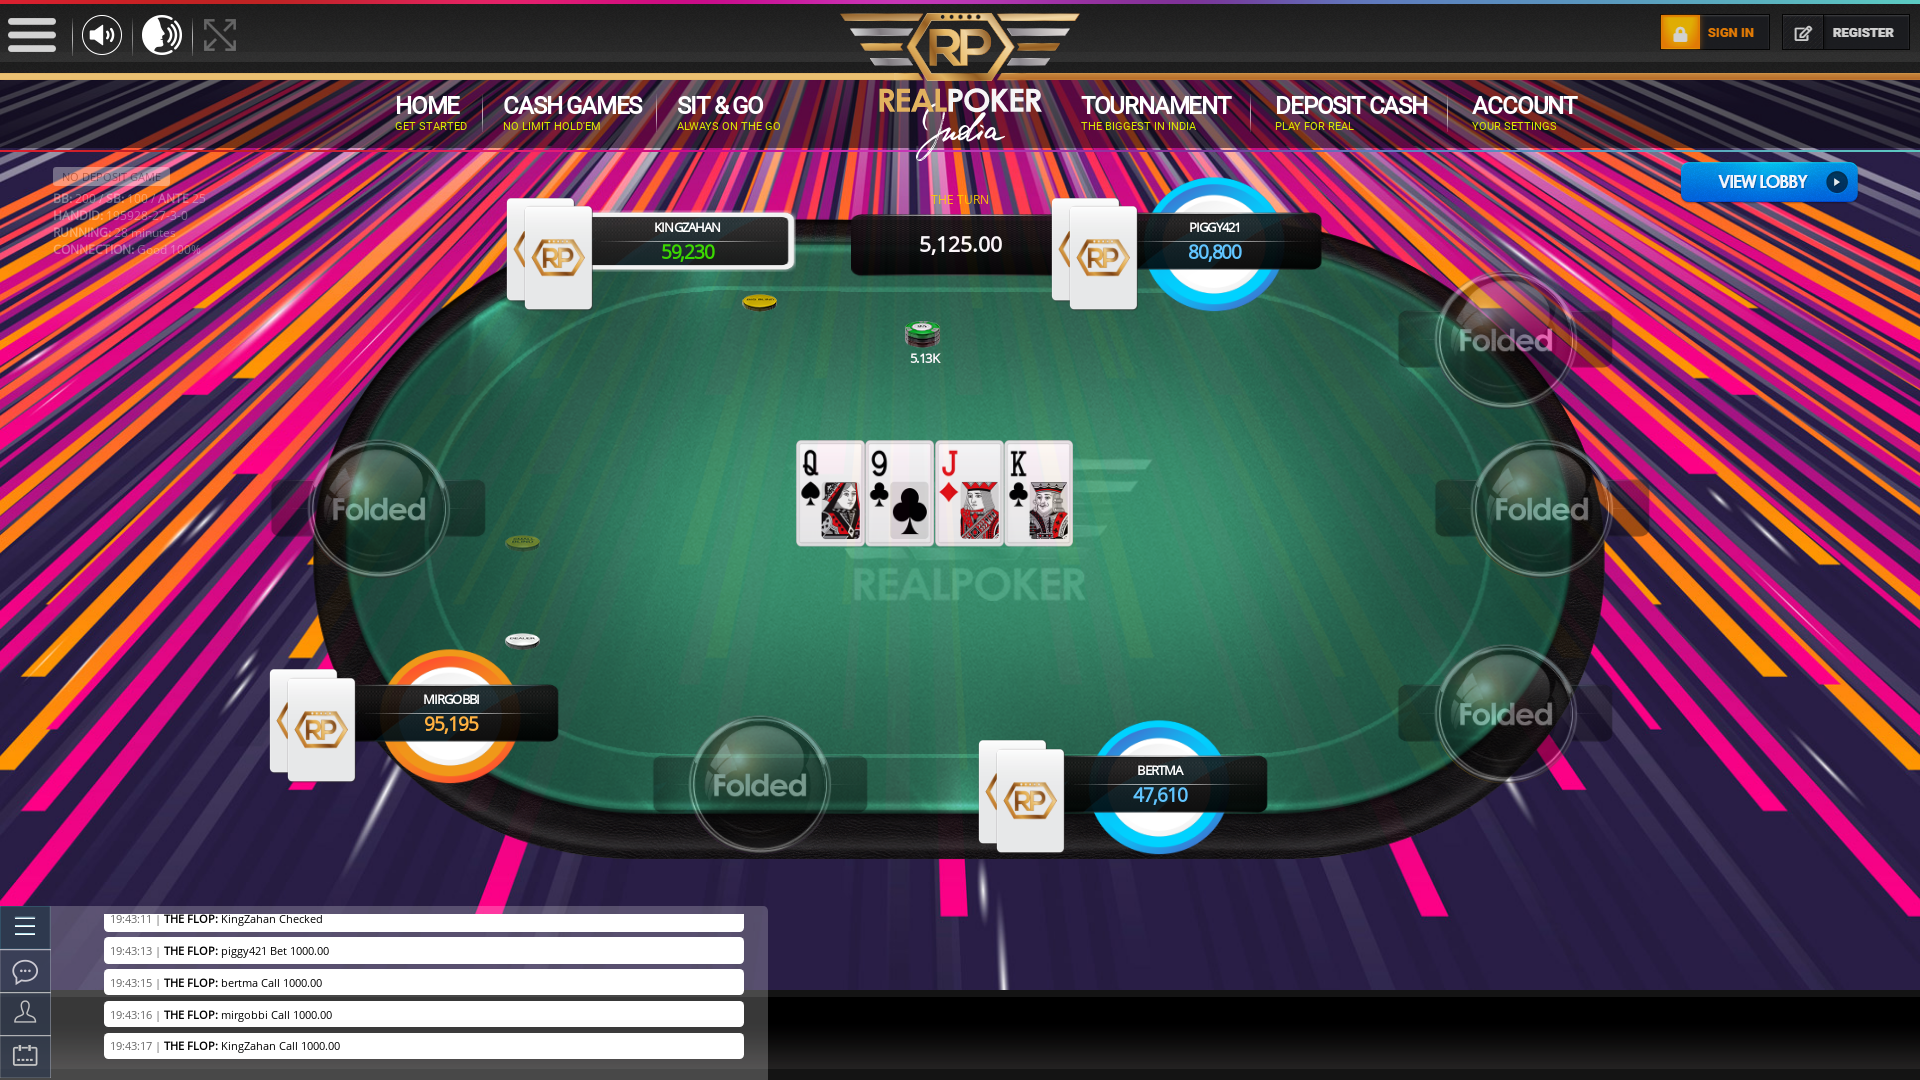 Alipore, Kolkata poker table on a 10 player table in the 28th minute of the match